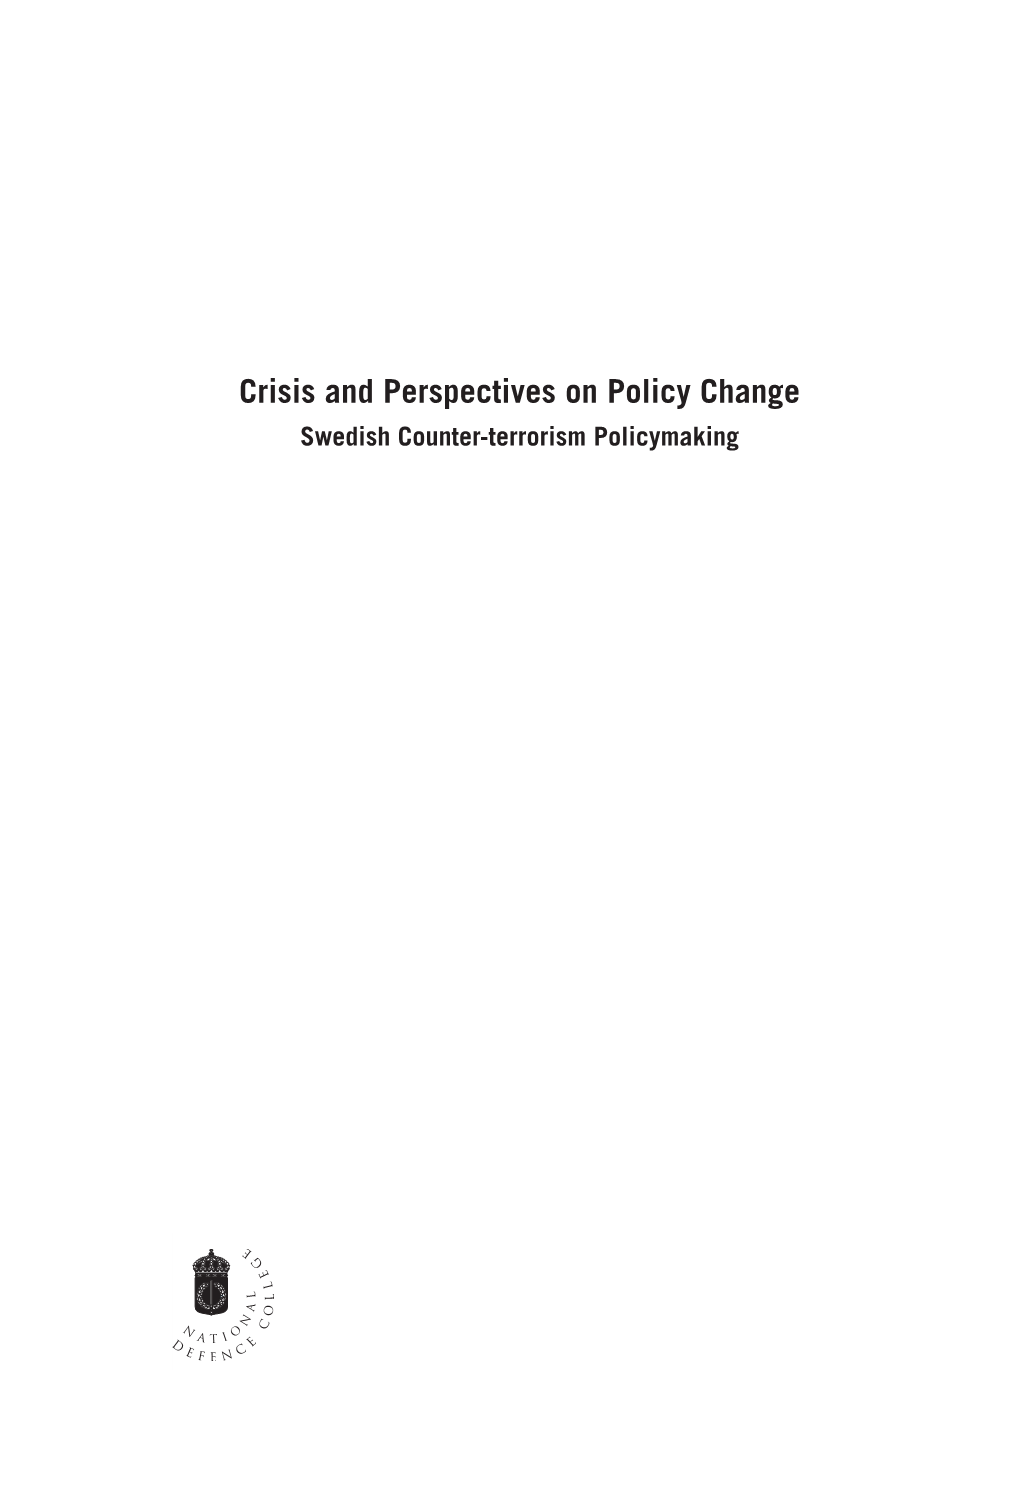 Crisis and Perspectives on Policy Change: Swedish Counter-Terrorism Policymaking Author: Dan Hansén Swedish National Defence College, Crismart Publication No